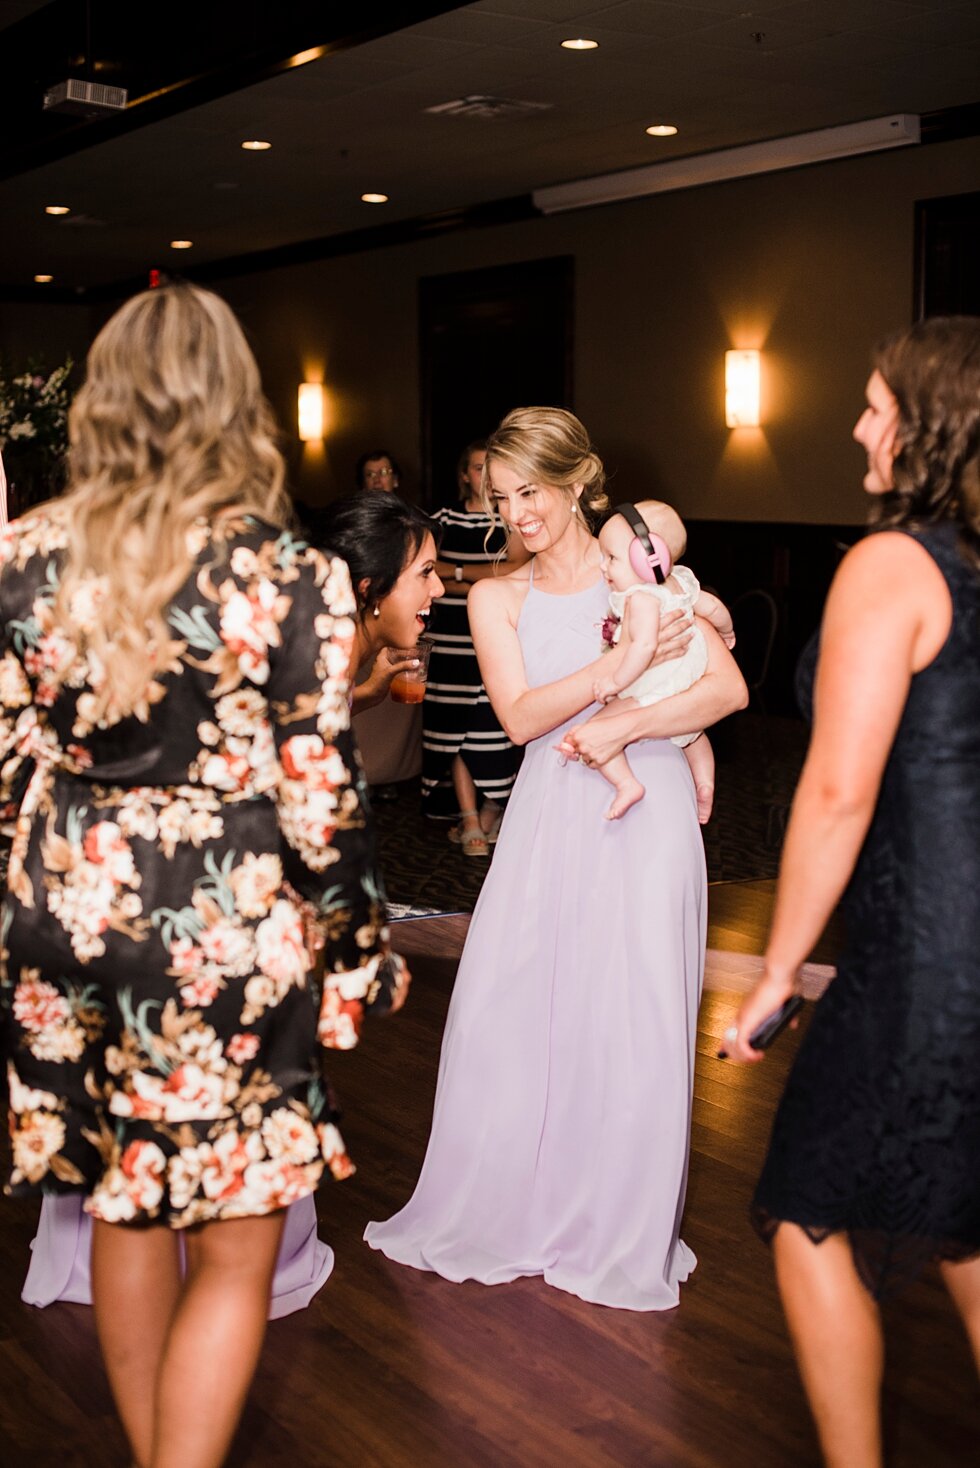  Wedding party dancing during the reception and celebrating the bride and groom. wedding ceremony details stunning photography married midwest louisville kentucky #weddingphoto #love #justmarried #midwestphotographer #kywedding #louisville #kentuckyw